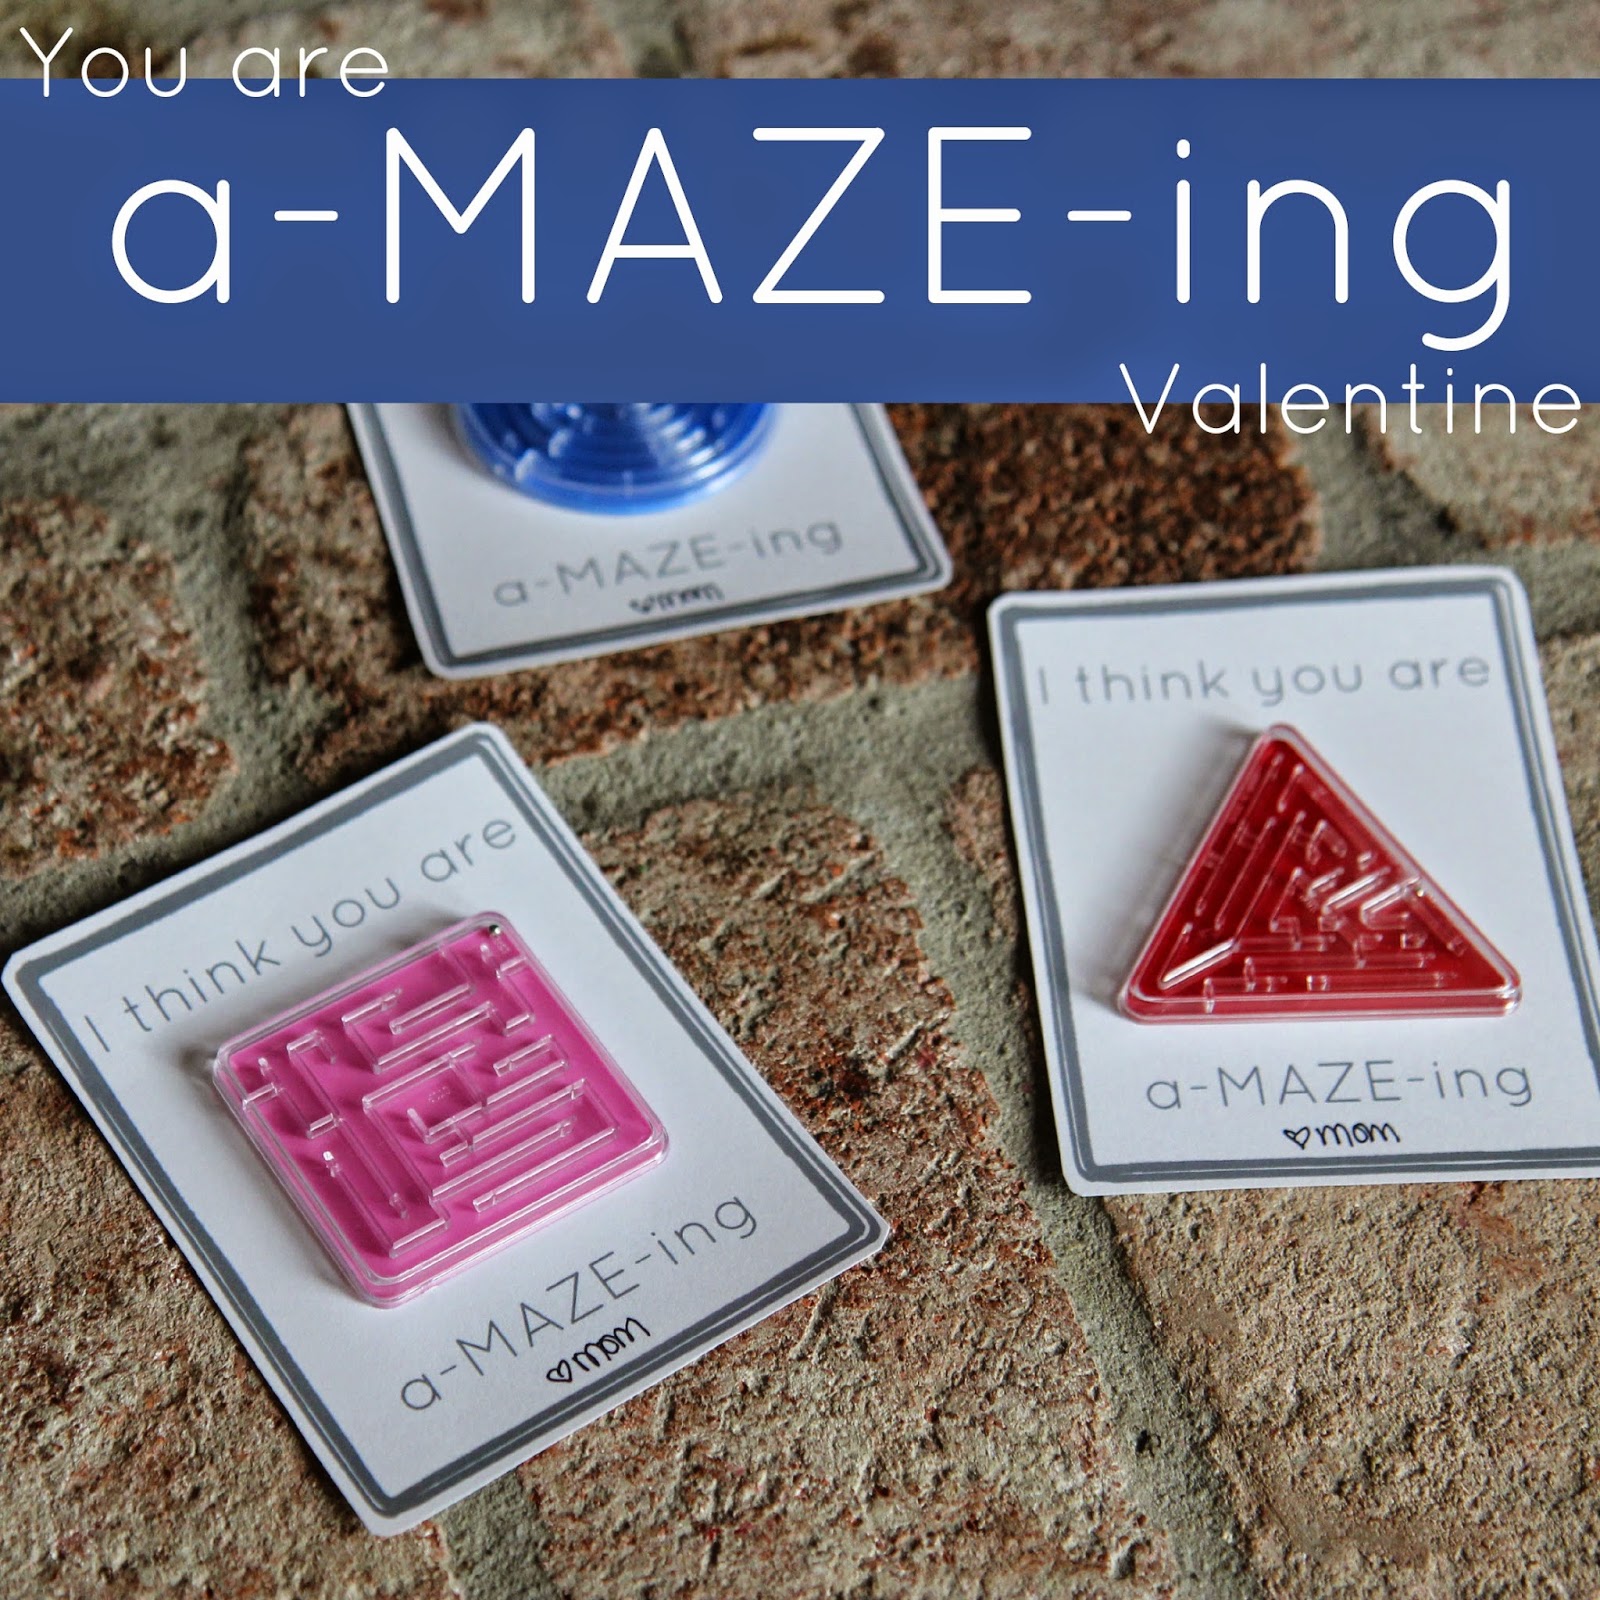 Toddler Approved!: You are a-MAZE-ING Valentine